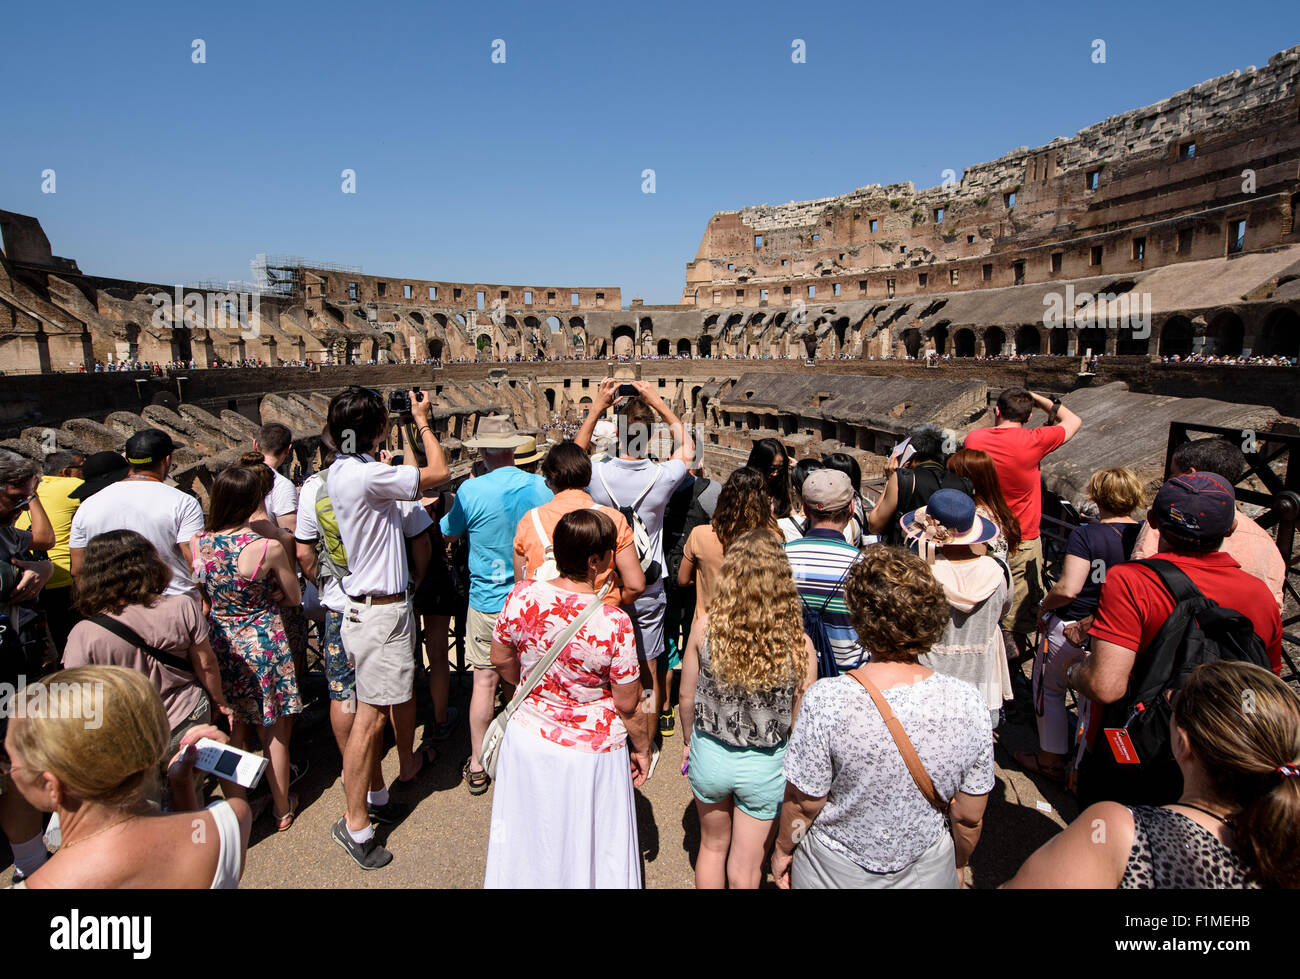 Rome. Italy. Crowds of tourists inside the Roman Colosseum. Stock Photo